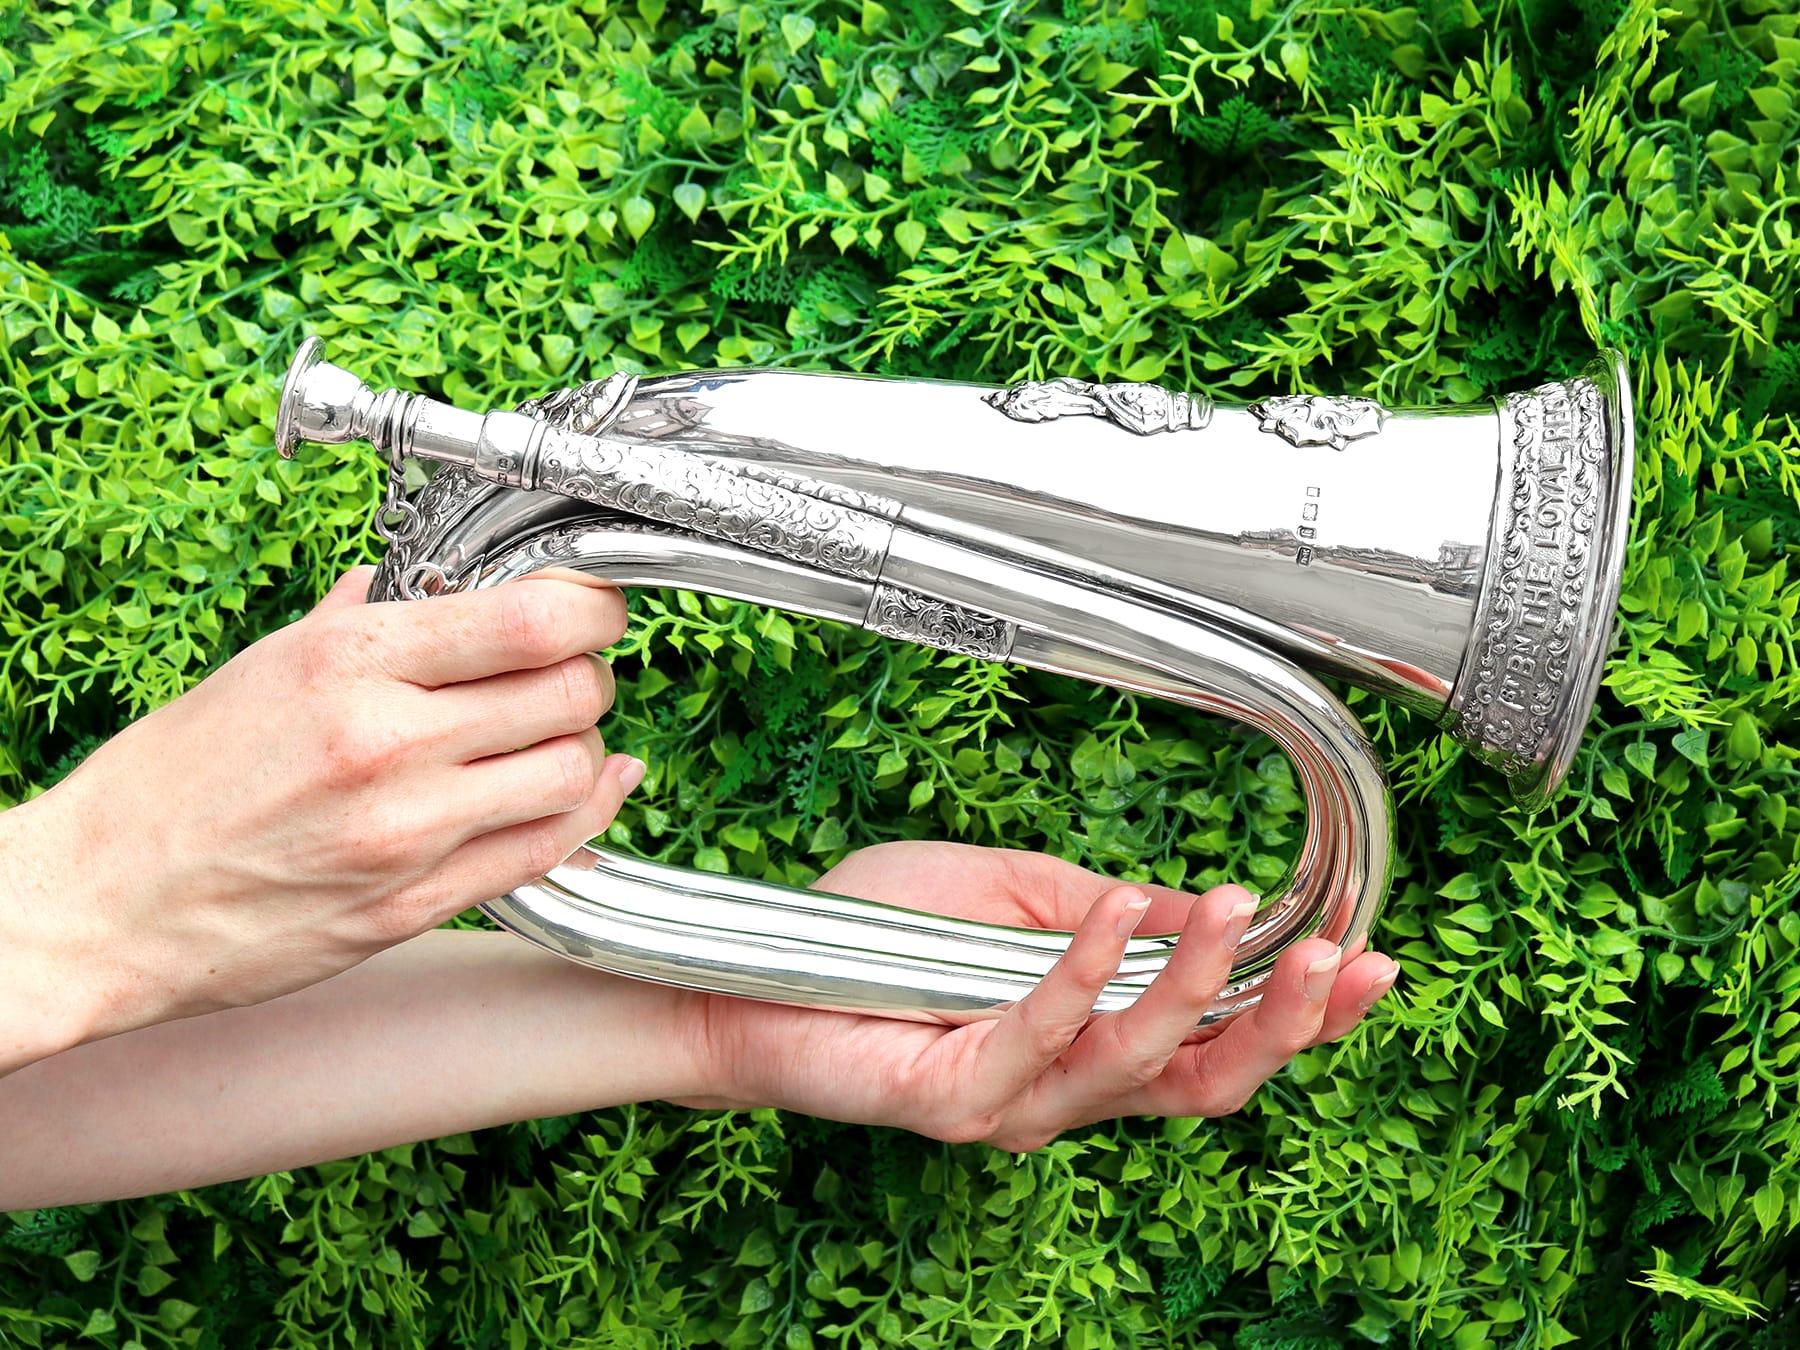 An exceptional, fine and impressive, large antique George V sterling silver regimental bugle; part of our diverse military silverware collection.

This exceptional antique George V sterling silver regimental bugle has a coiling form with a wide